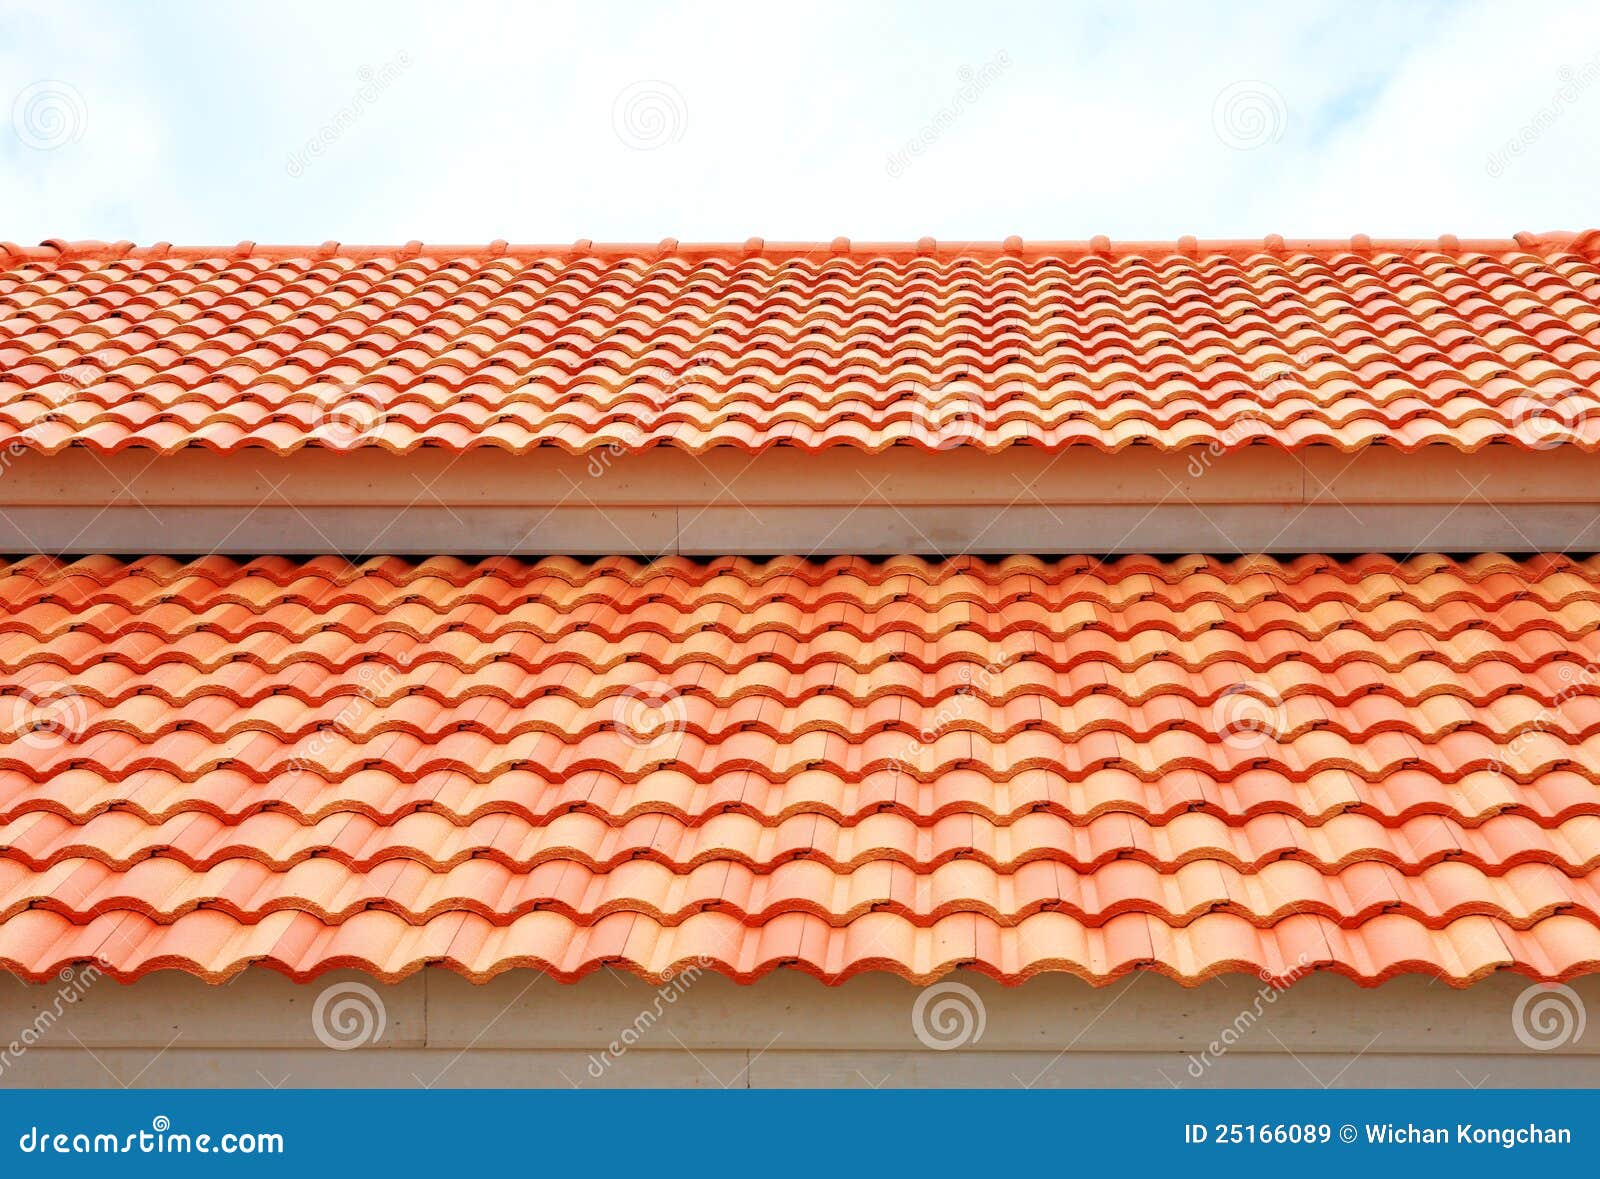 house roof texture